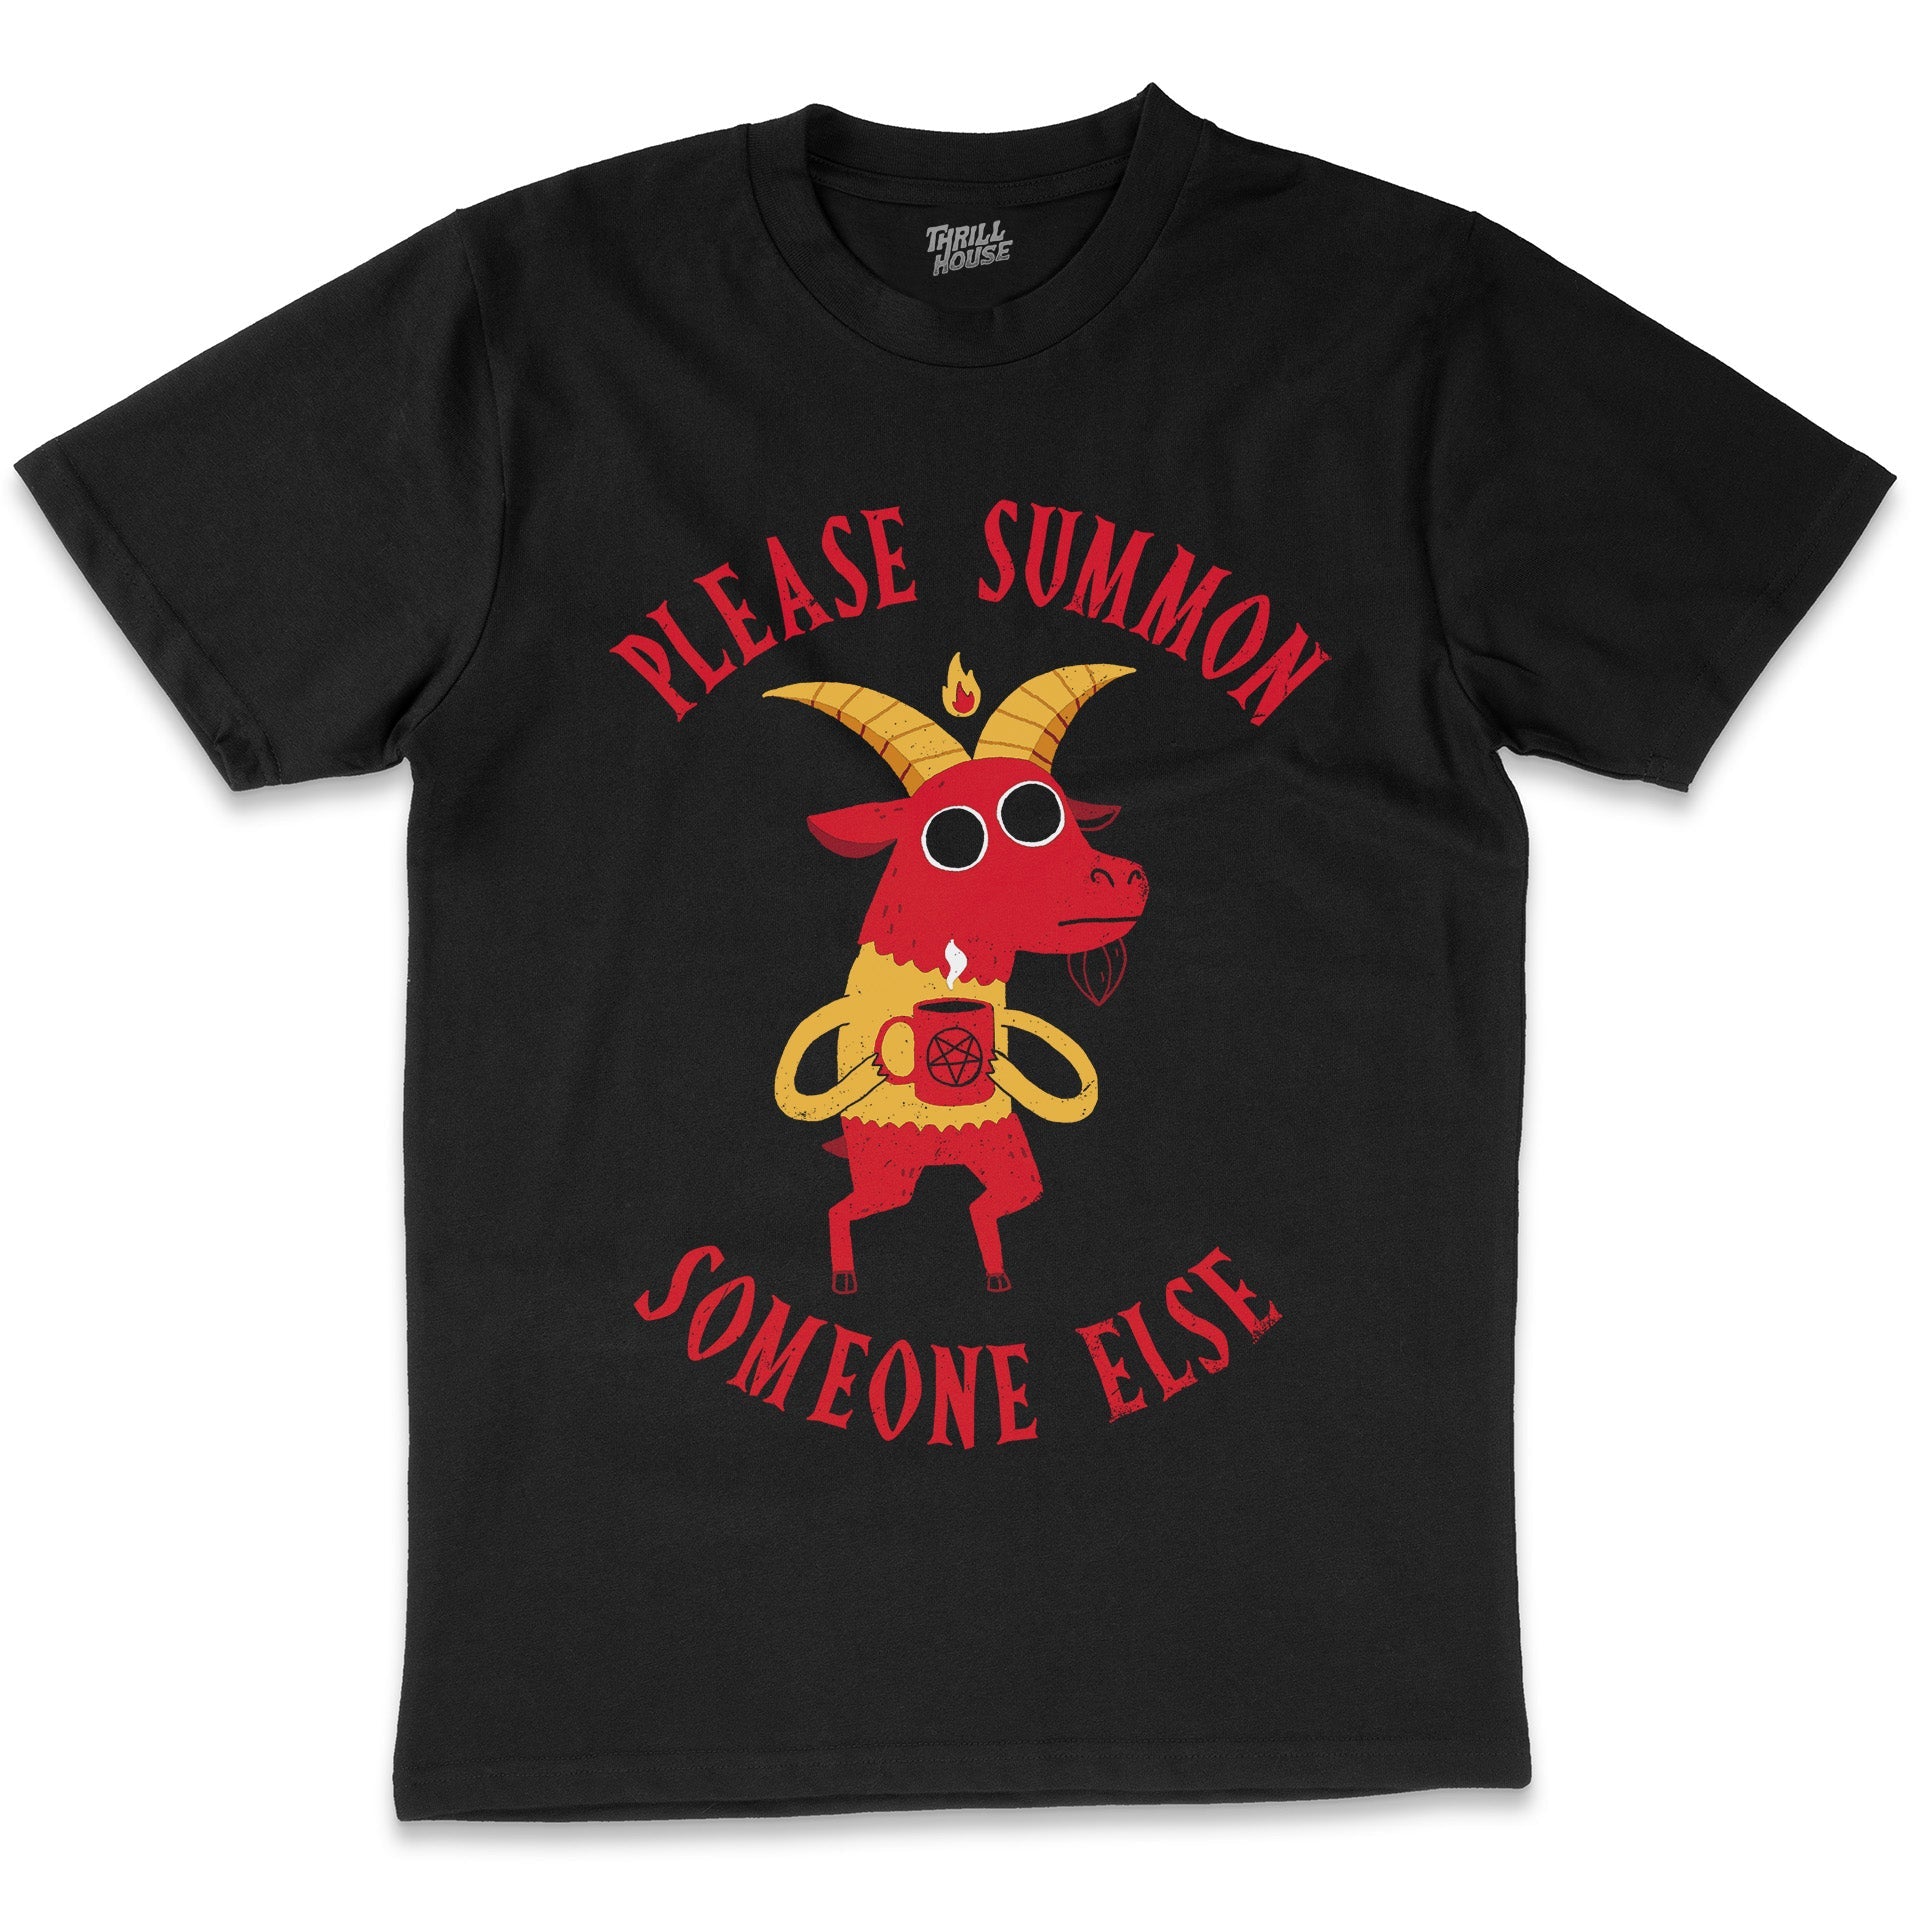 Summon Someone Else Demon Lazy Tired Coffee Morning Baphomet Devil Funny Cotton T-Shirt